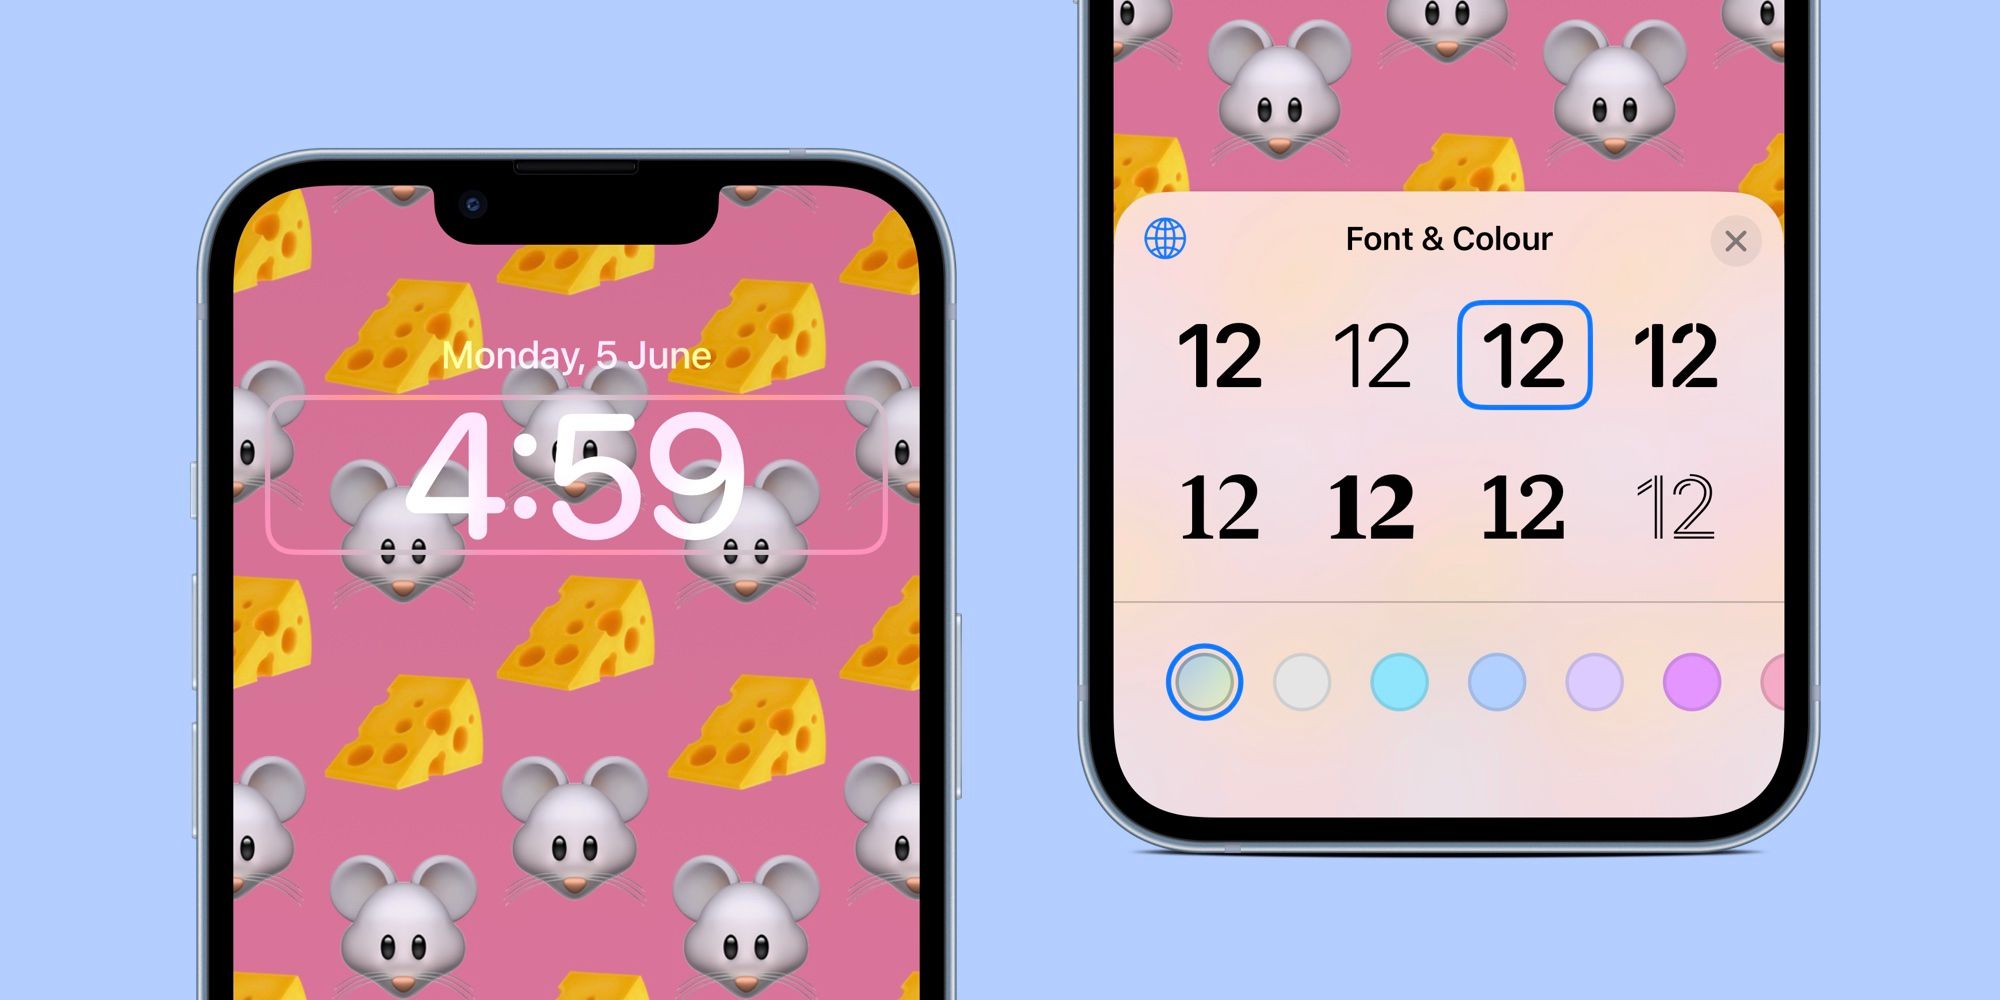 iPhone clock font and color options